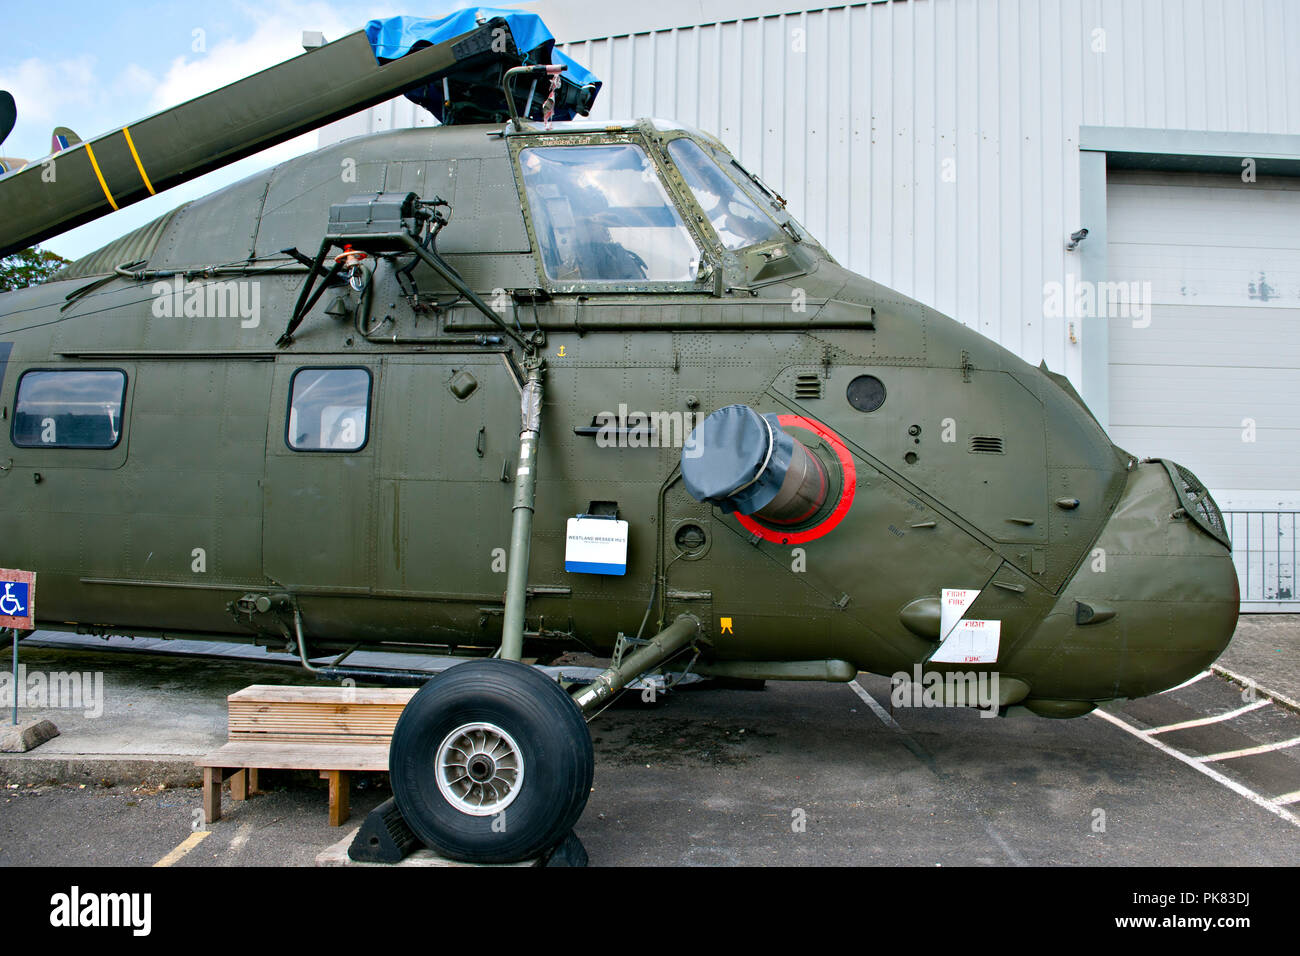 The the front of a Westland Wessex Helicopter  on display at the Tangmere Military Aviation Museum, UK Stock Photo